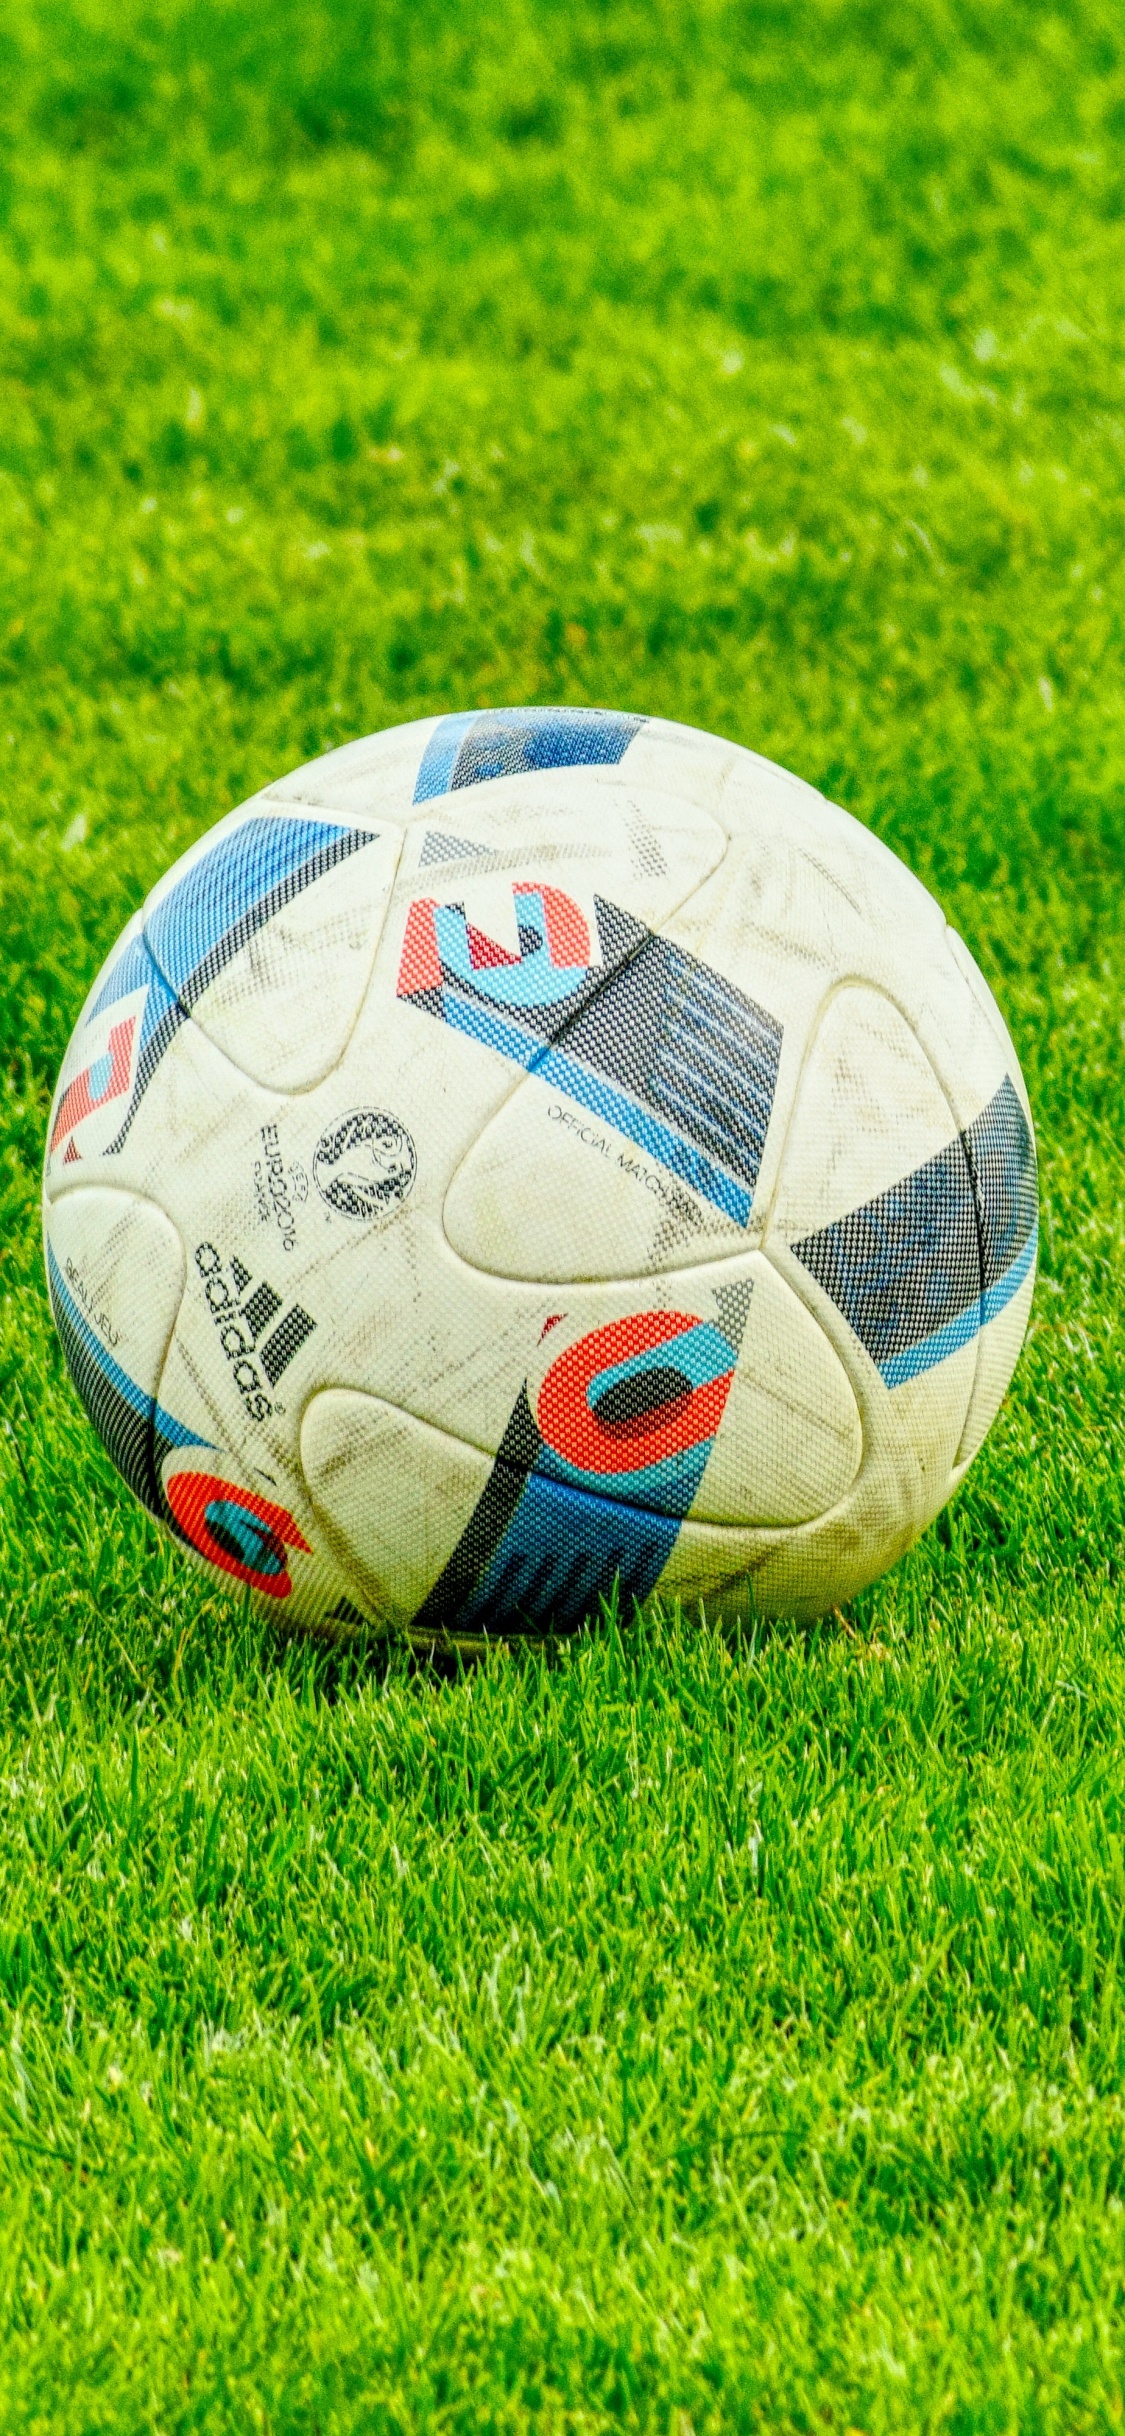 White Soccer Ball on Green Grass Field During Daytime. Wallpaper in 1125x2436 Resolution